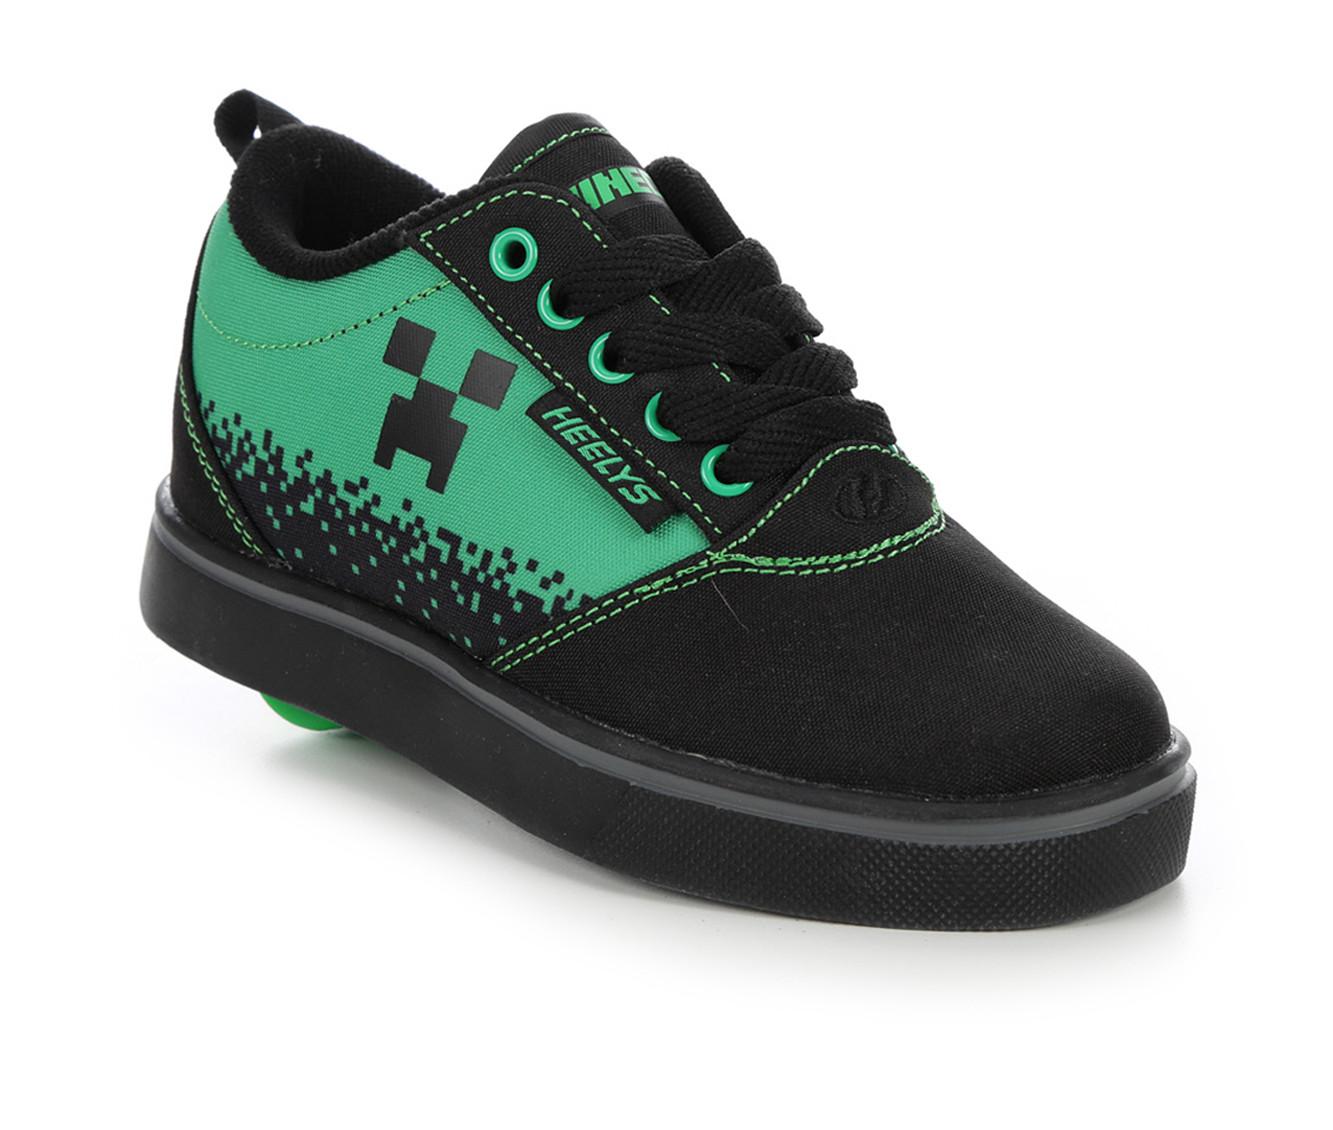 Minecraft Shoes for Boys, Light-Up Sneakers with